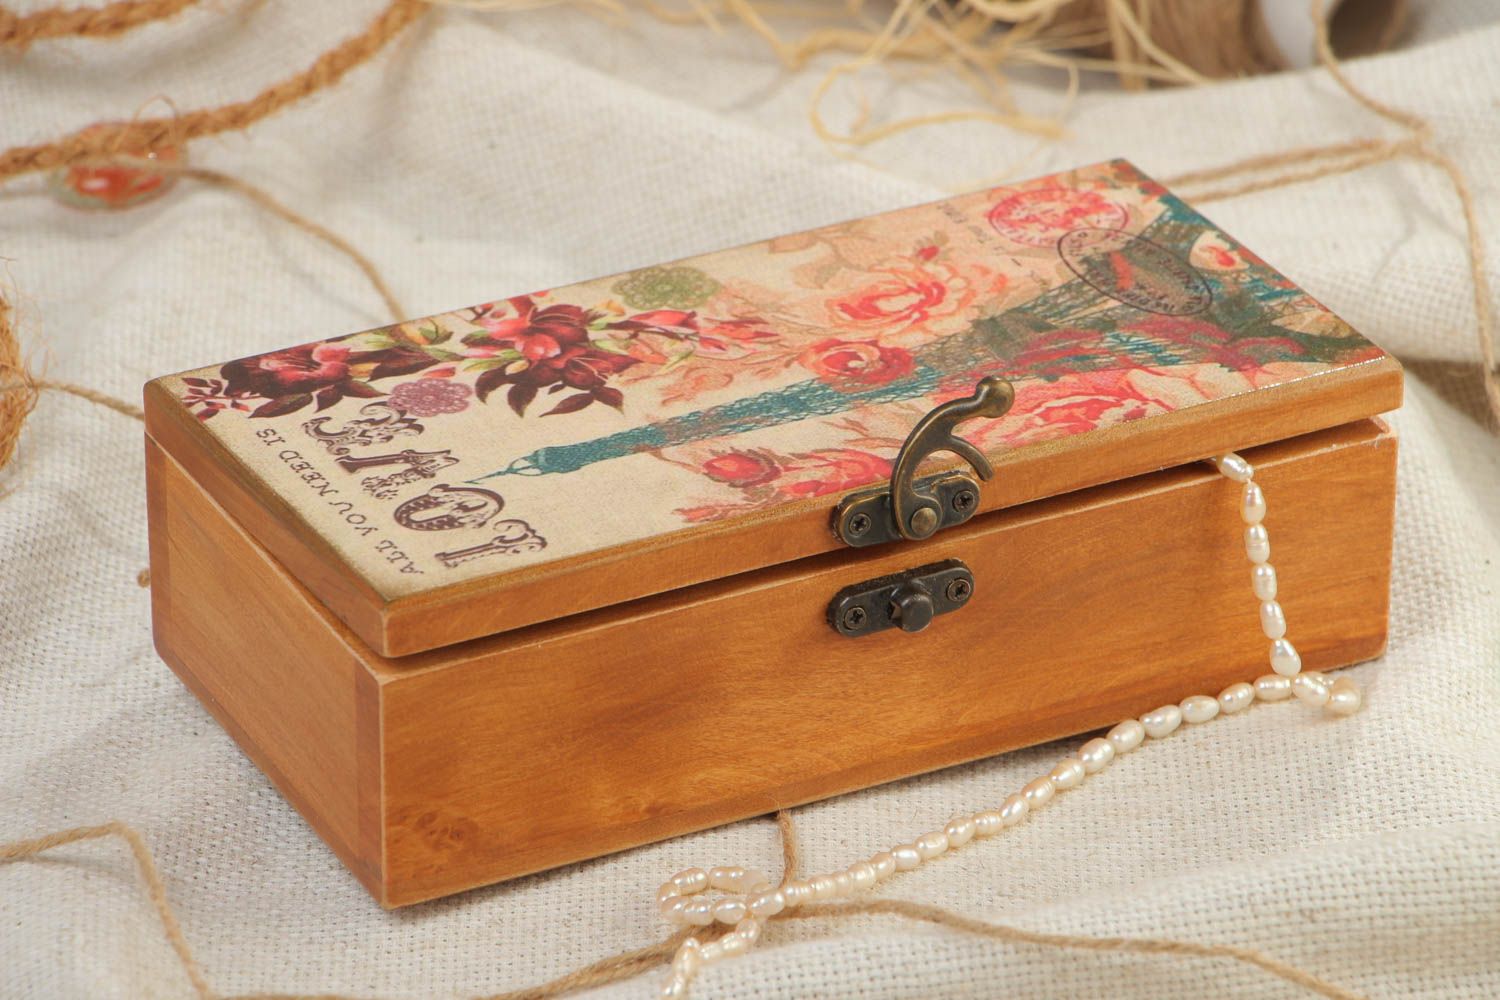 Handmade rectangular wooden jewelry box covered with wood stain and painted with acrylics photo 1